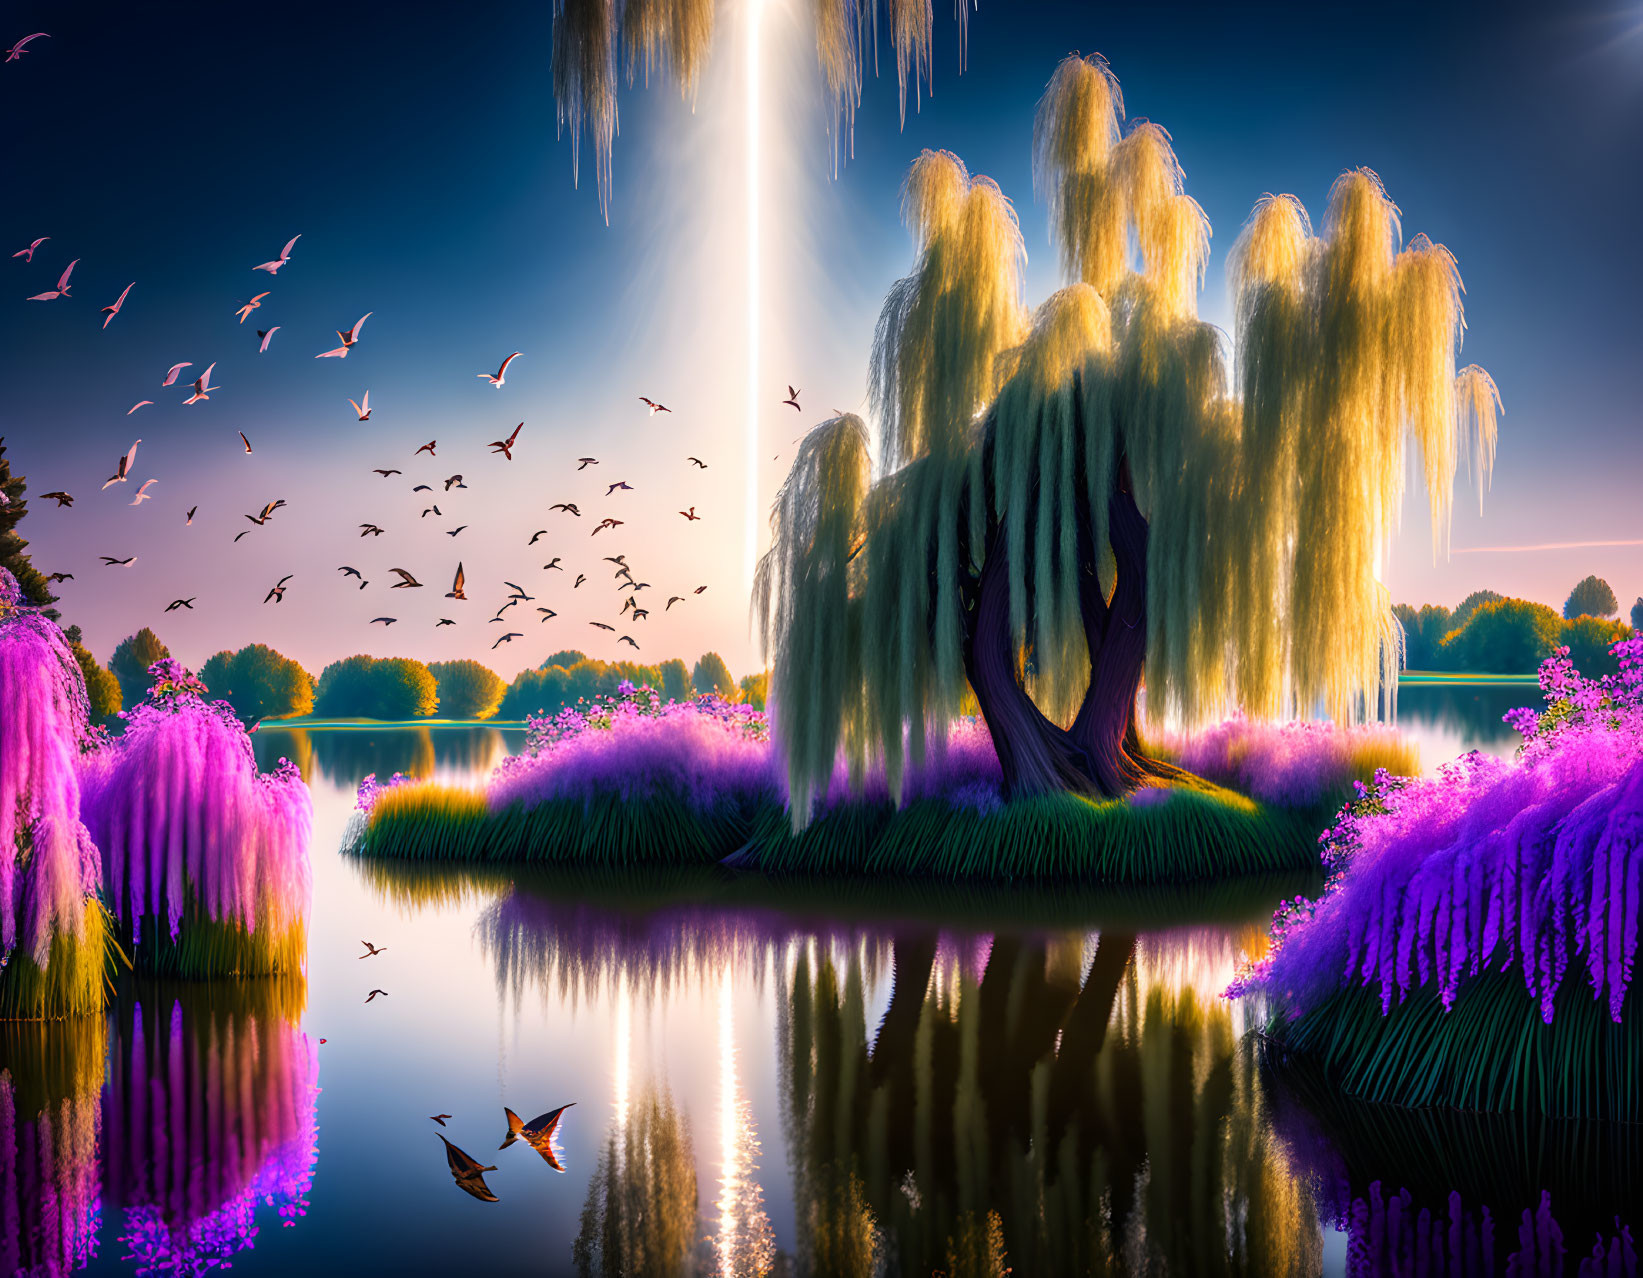 Tranquil lake with majestic willow tree and vibrant flowers under gleaming sunbeam